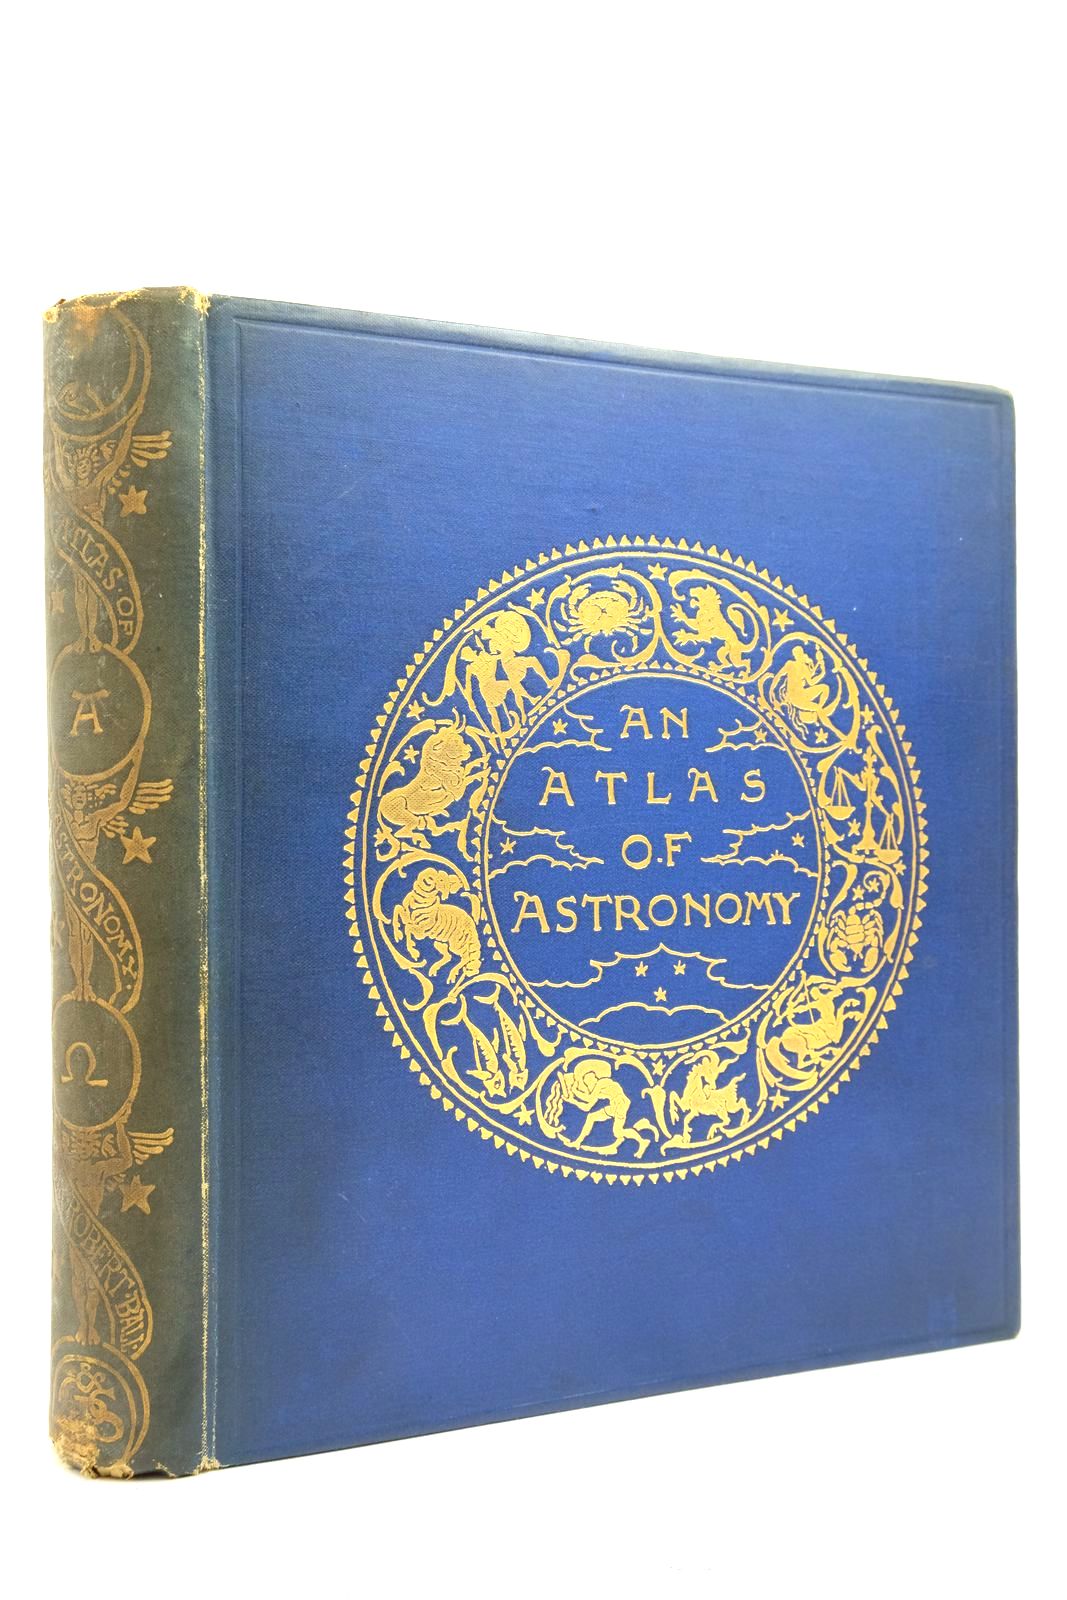 Photo of AN ATLAS OF ASTRONOMY- Stock Number: 2140761